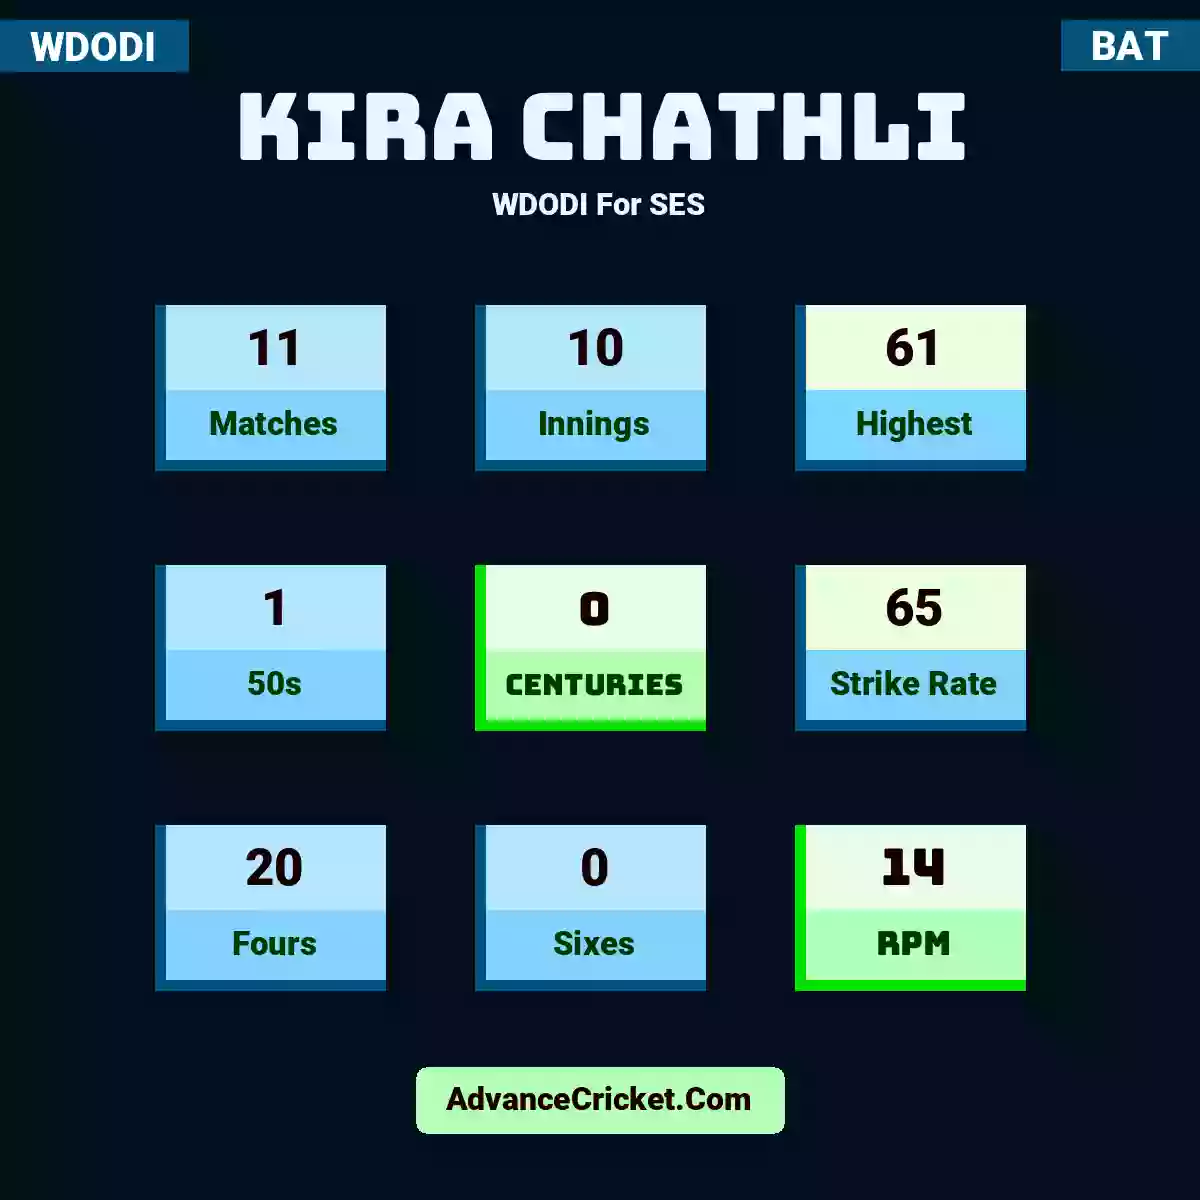 Kira Chathli WDODI  For SES, Kira Chathli played 11 matches, scored 61 runs as highest, 1 half-centuries, and 0 centuries, with a strike rate of 65. K.Chathli hit 20 fours and 0 sixes, with an RPM of 14.